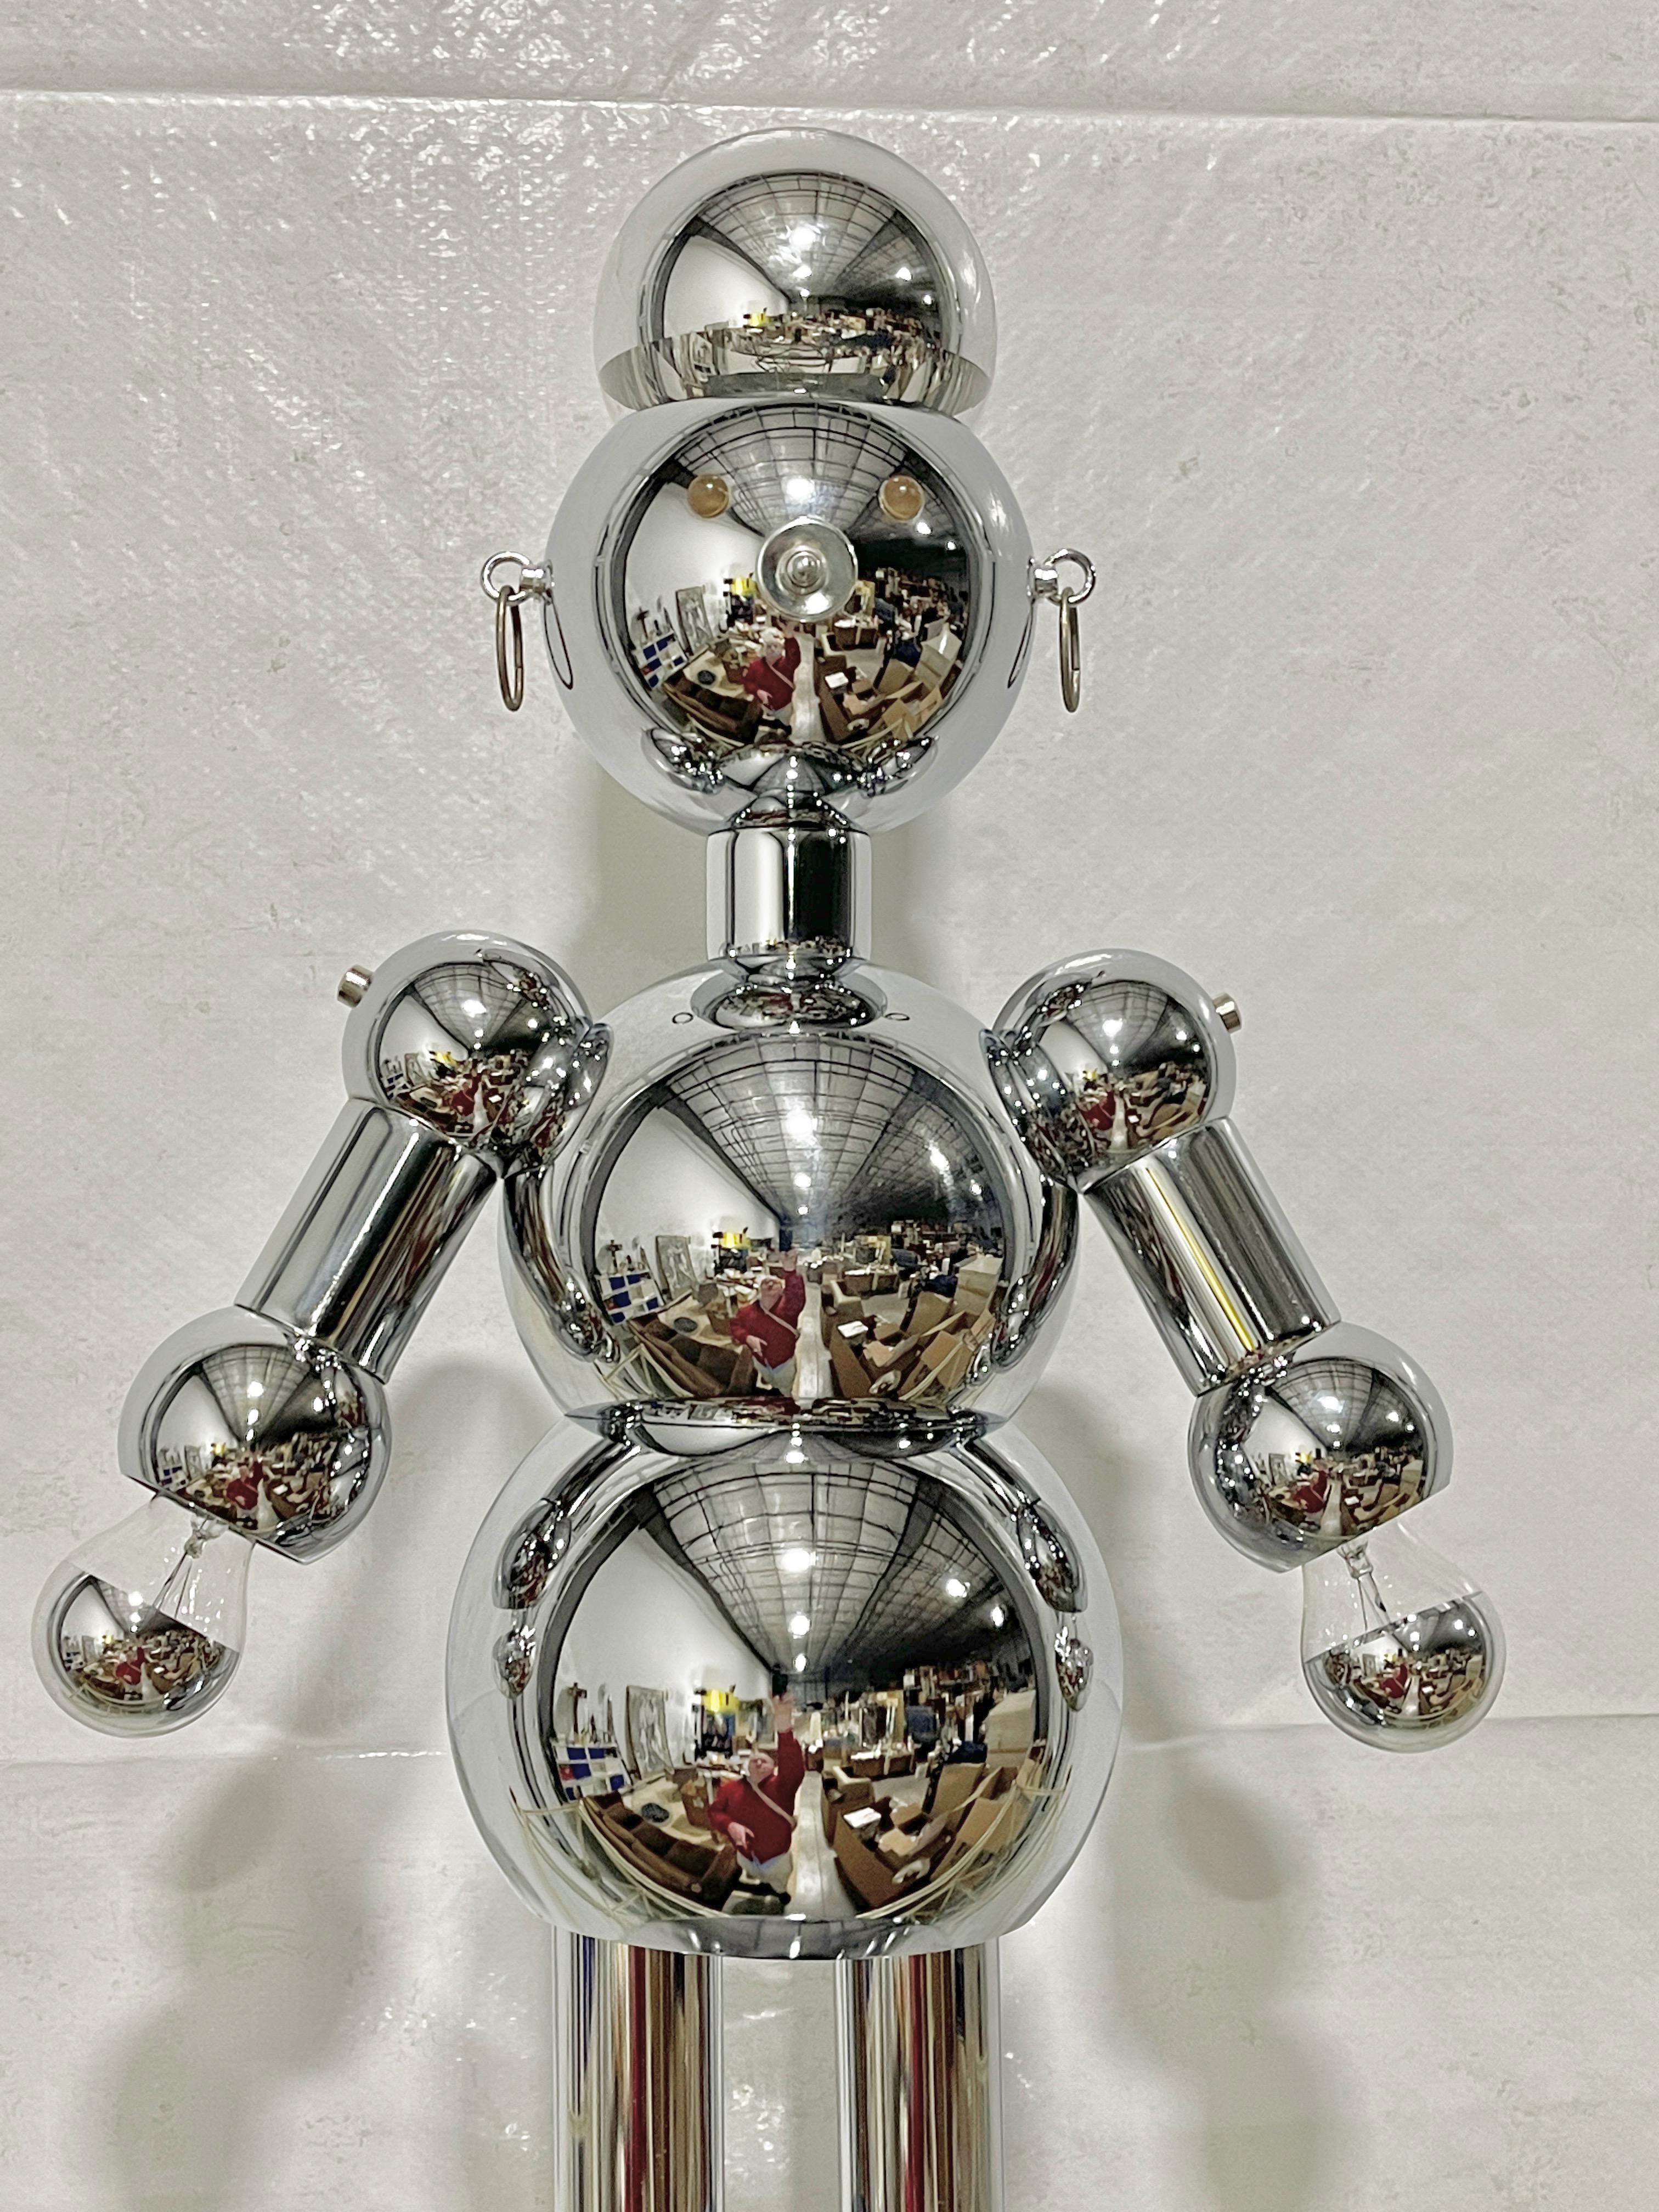 Highly desirable chrome robot standing lamp by Torino Lamps, 1978.
Often believed to be of Italian origin this robot and other character lamps were designed and produced in Florida by Atrio Consolidated Industries, Inc. dba Torino Lamps and Tables.